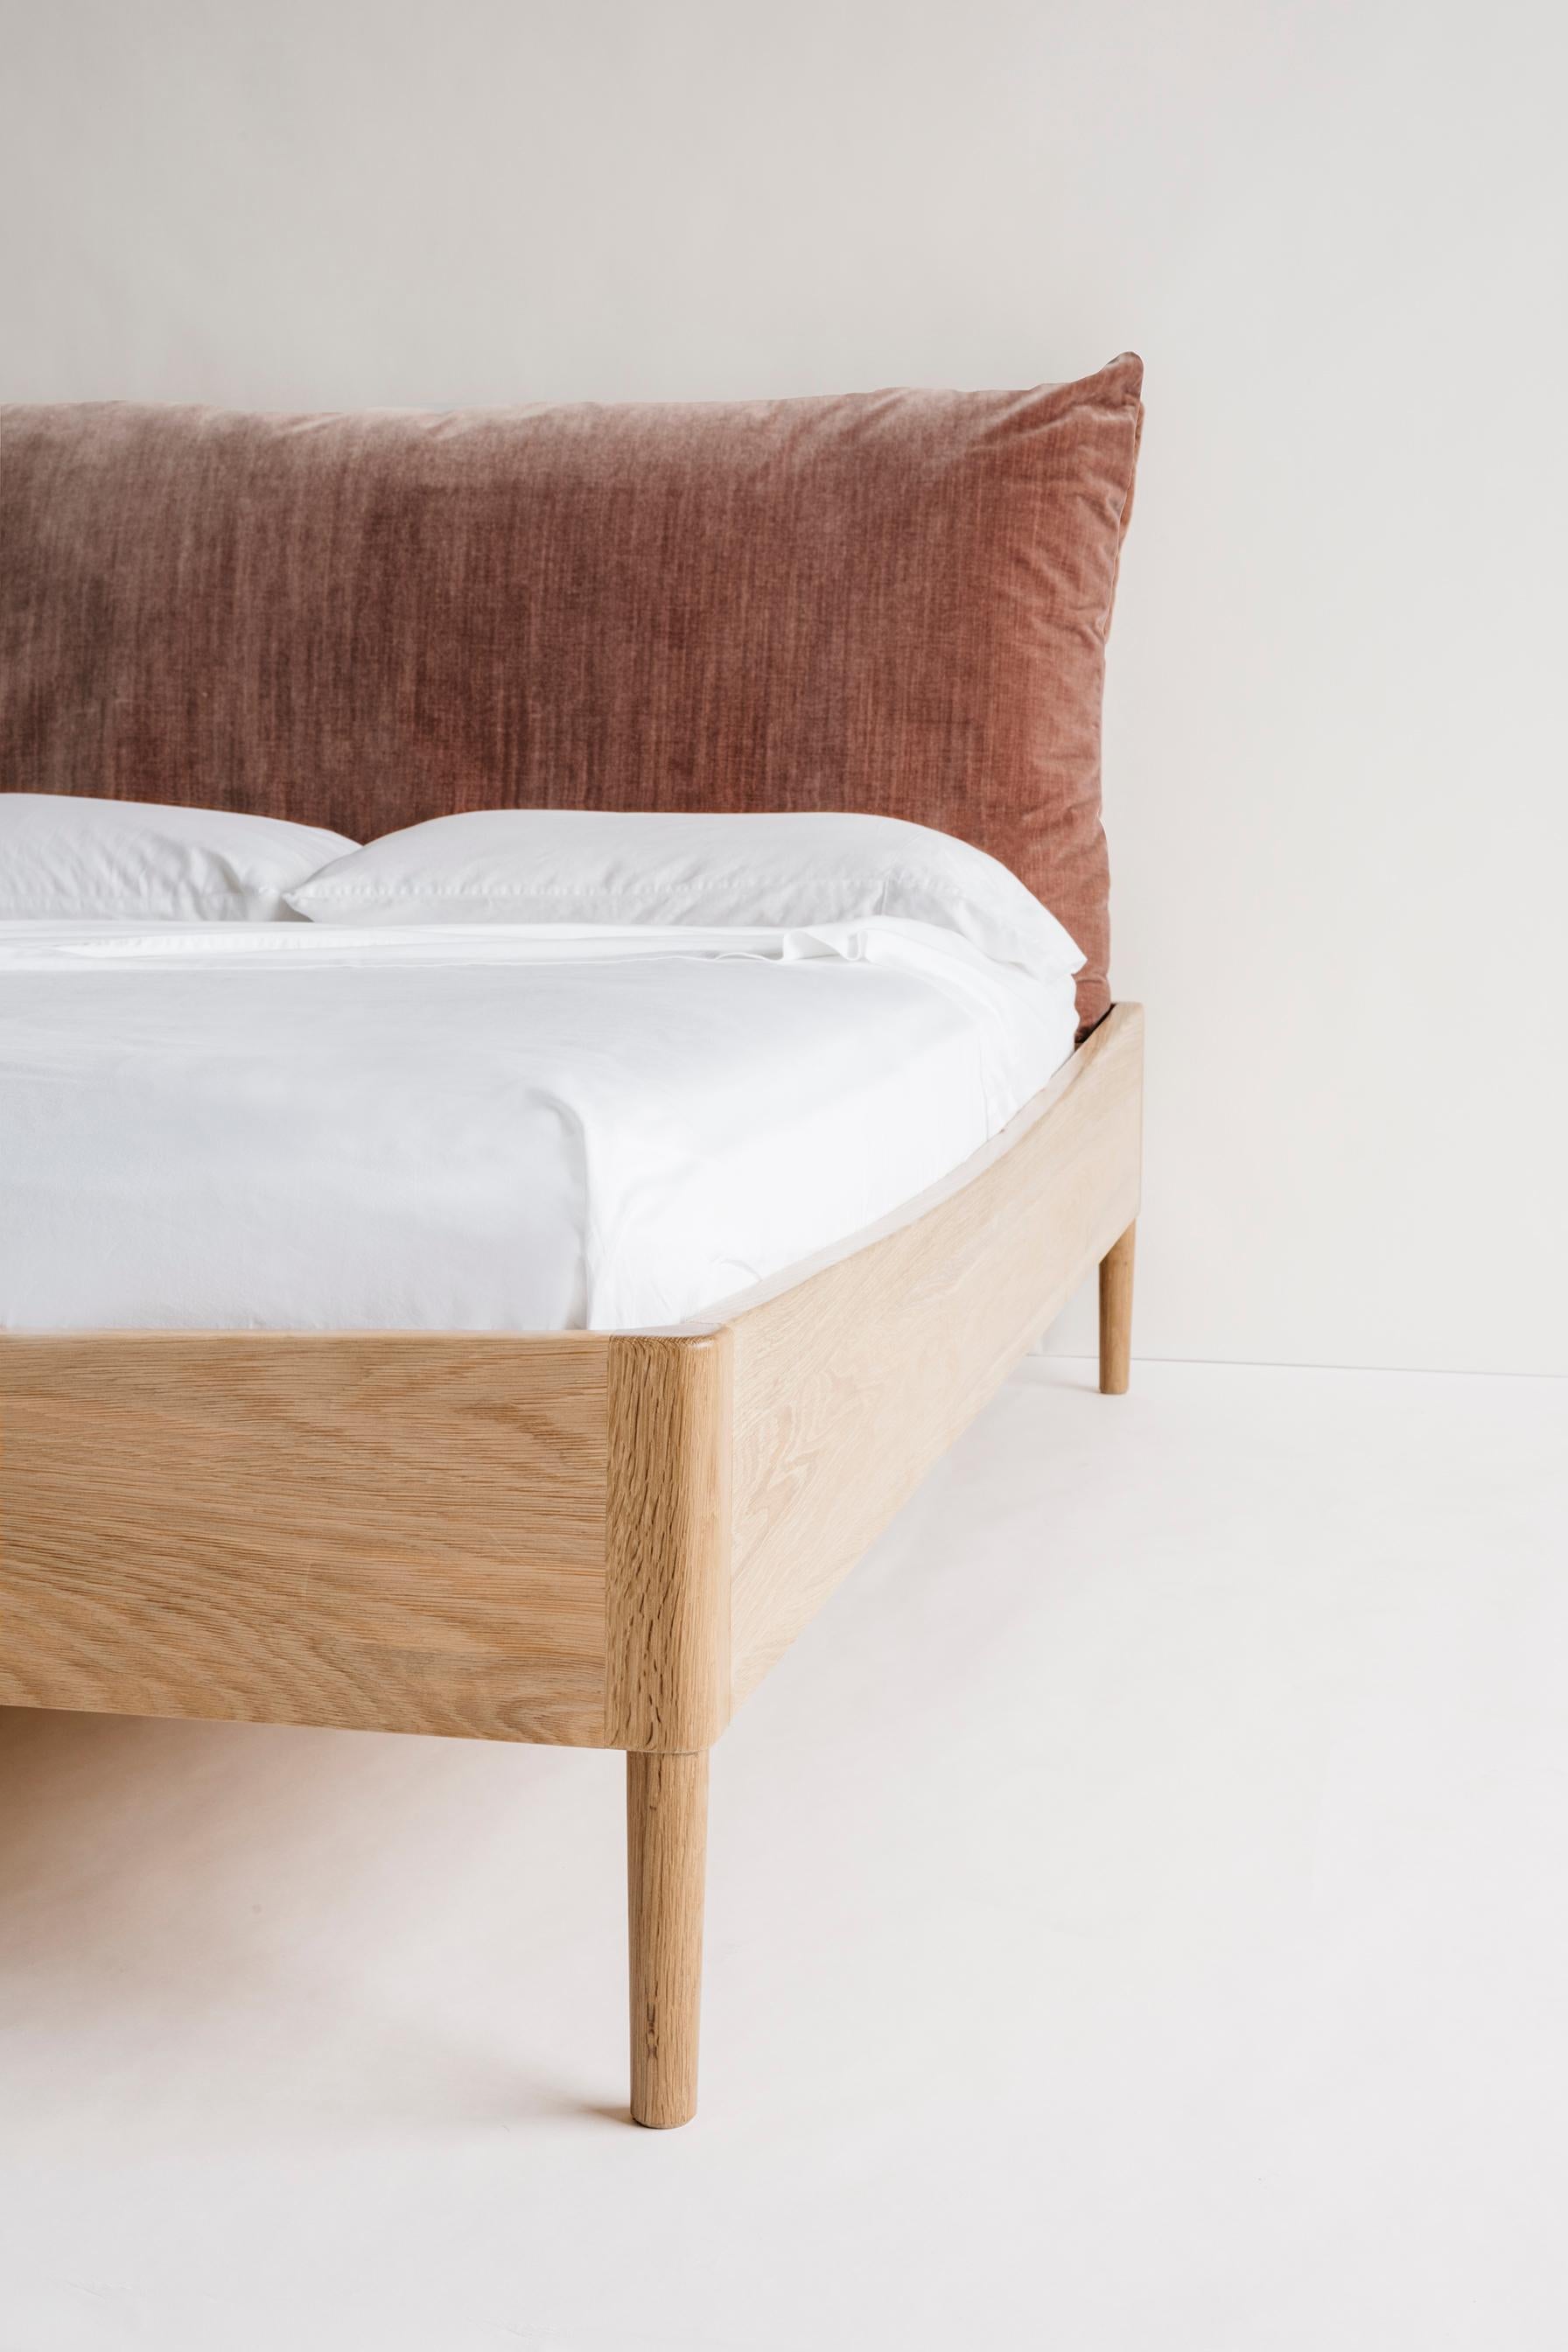 The Richard Watson frame and pillow bed was designed in pursuit of comfort and the perfect reading spot - the way the pillow sits in its frame, the height of the pillow in relation to the body, and the delicate balance of sturdiness and softness.